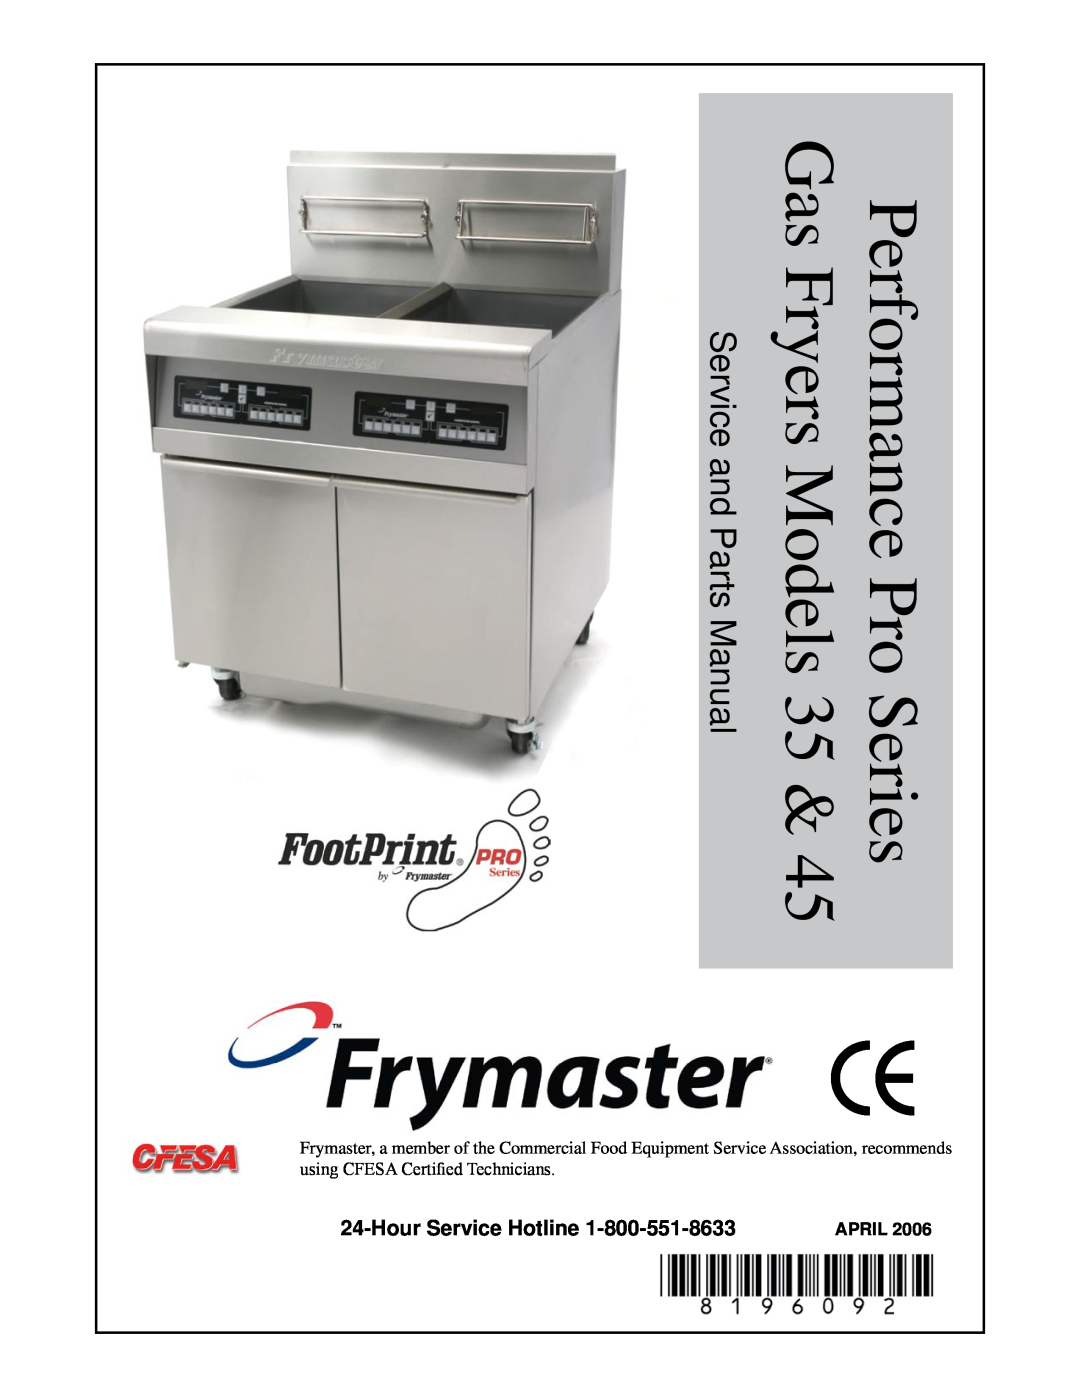 Frymaster 45 manual Hour Service Hotline, Performance Pro Series Gas Fryers Models 35, Service and Parts Manual, April 